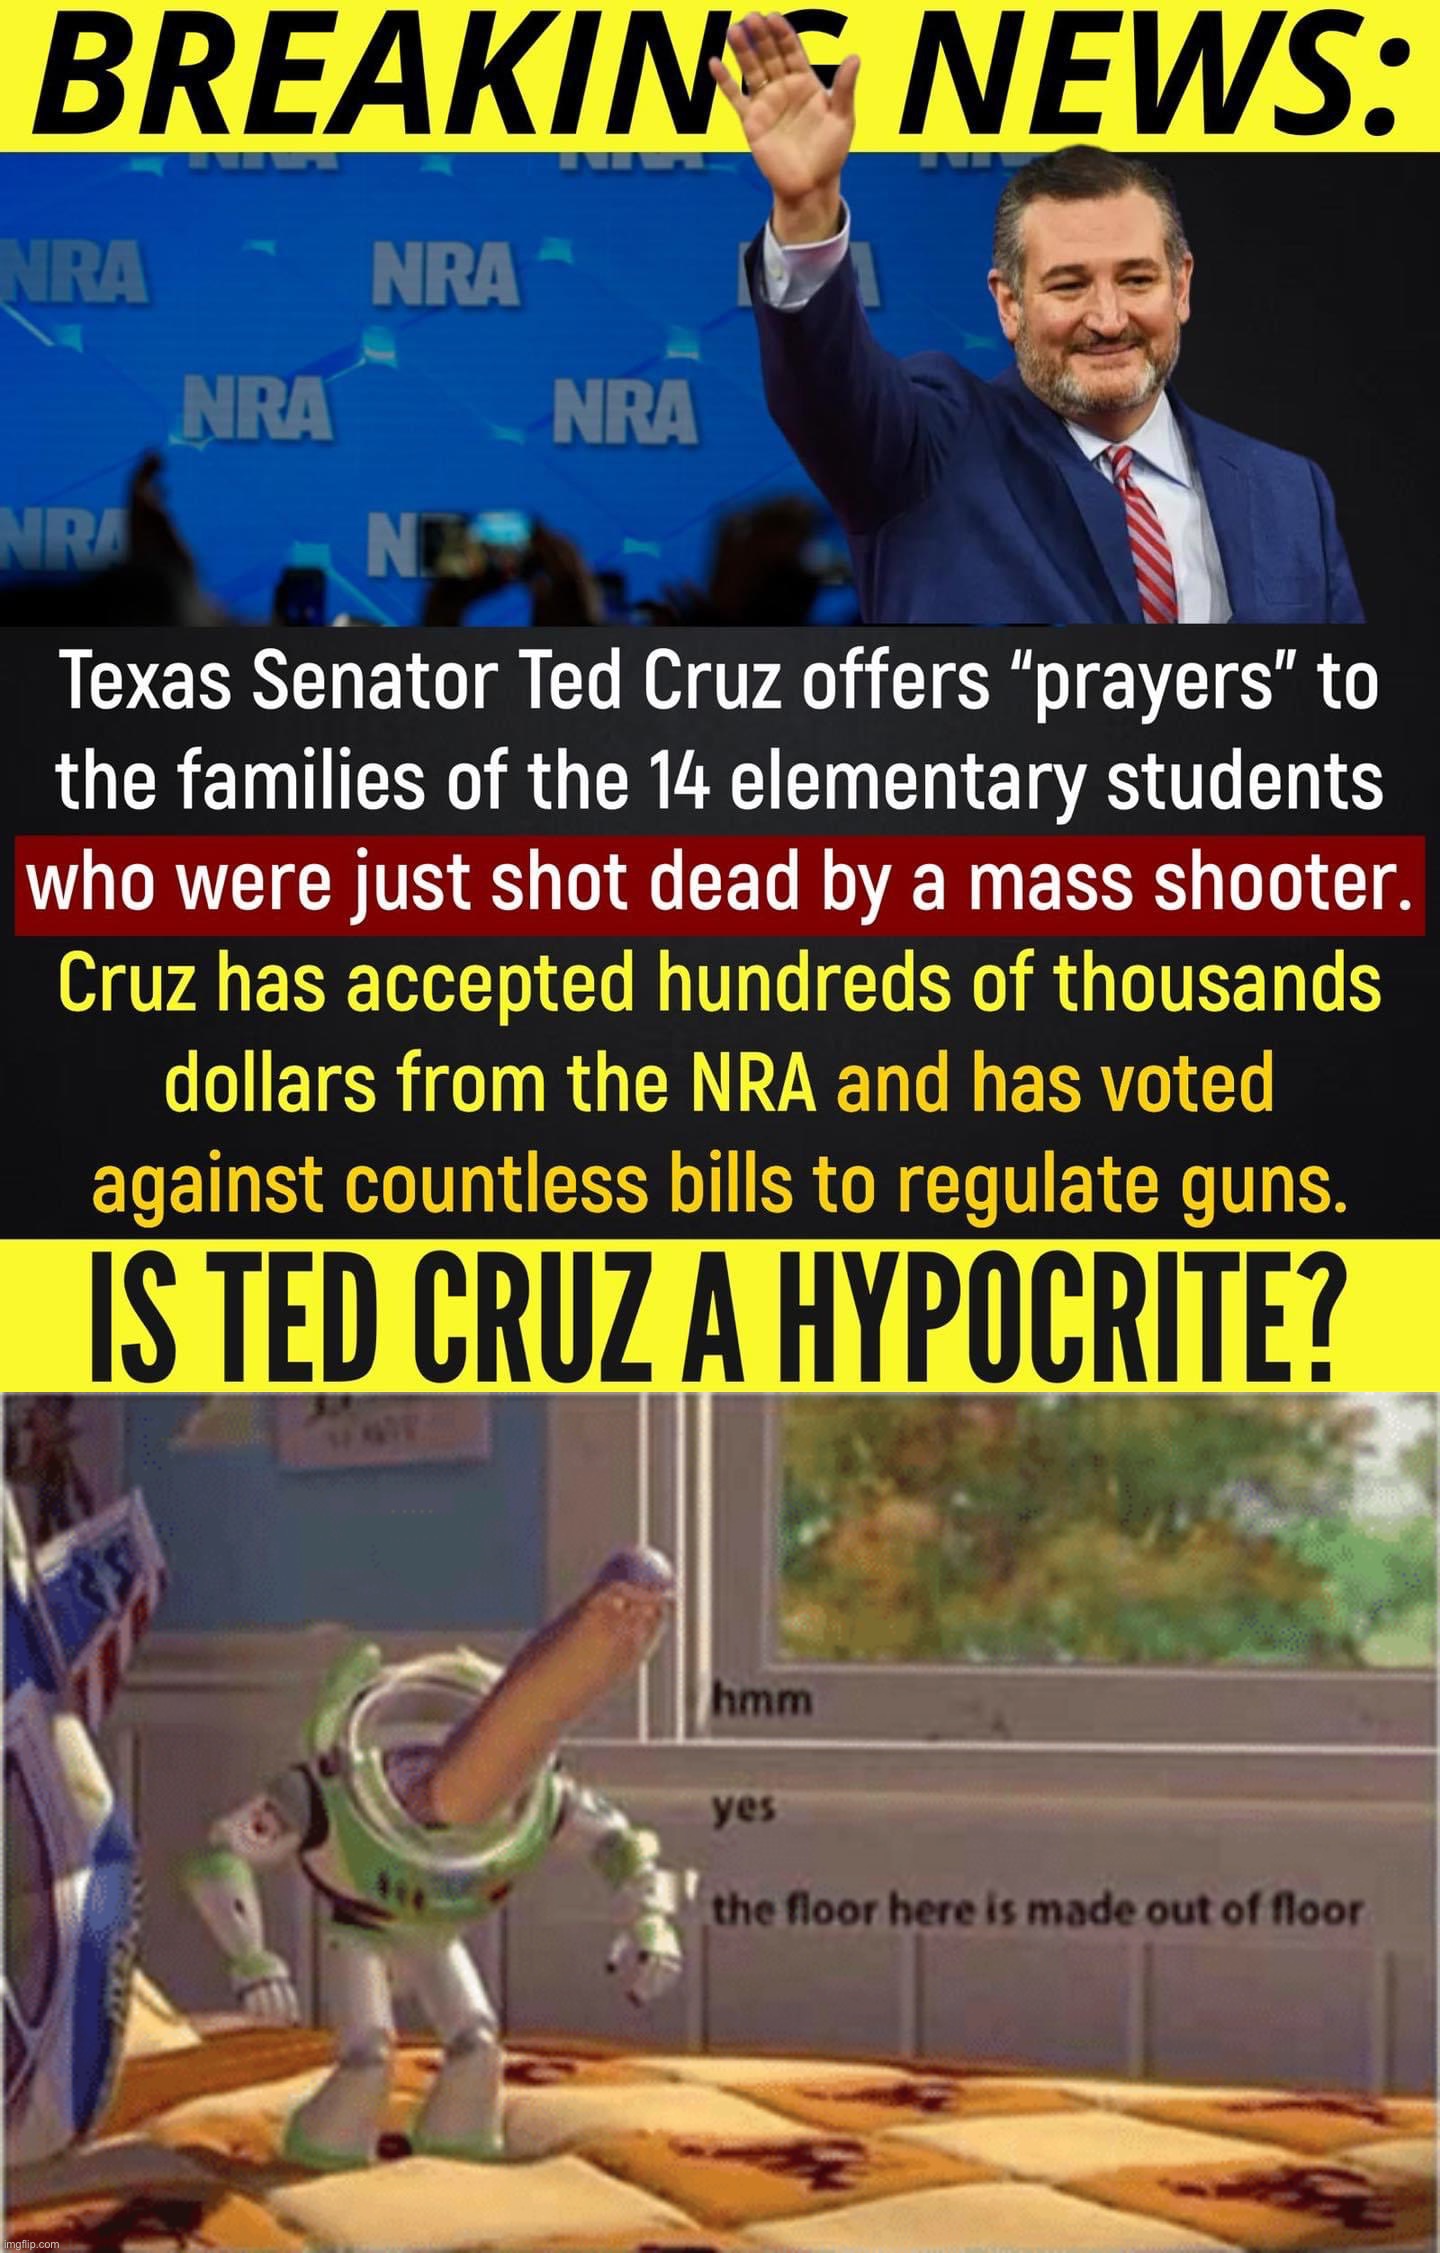 Is Ted Cruz a hypocrite? Well: Is the sky blue? Is water wet? Is the floor made out of floor? | image tagged in is ted cruz a hypocrite,hmm yes the floor here is made out of floor,ted cruz,conservative hypocrisy,hypocrite,hypocrisy | made w/ Imgflip meme maker